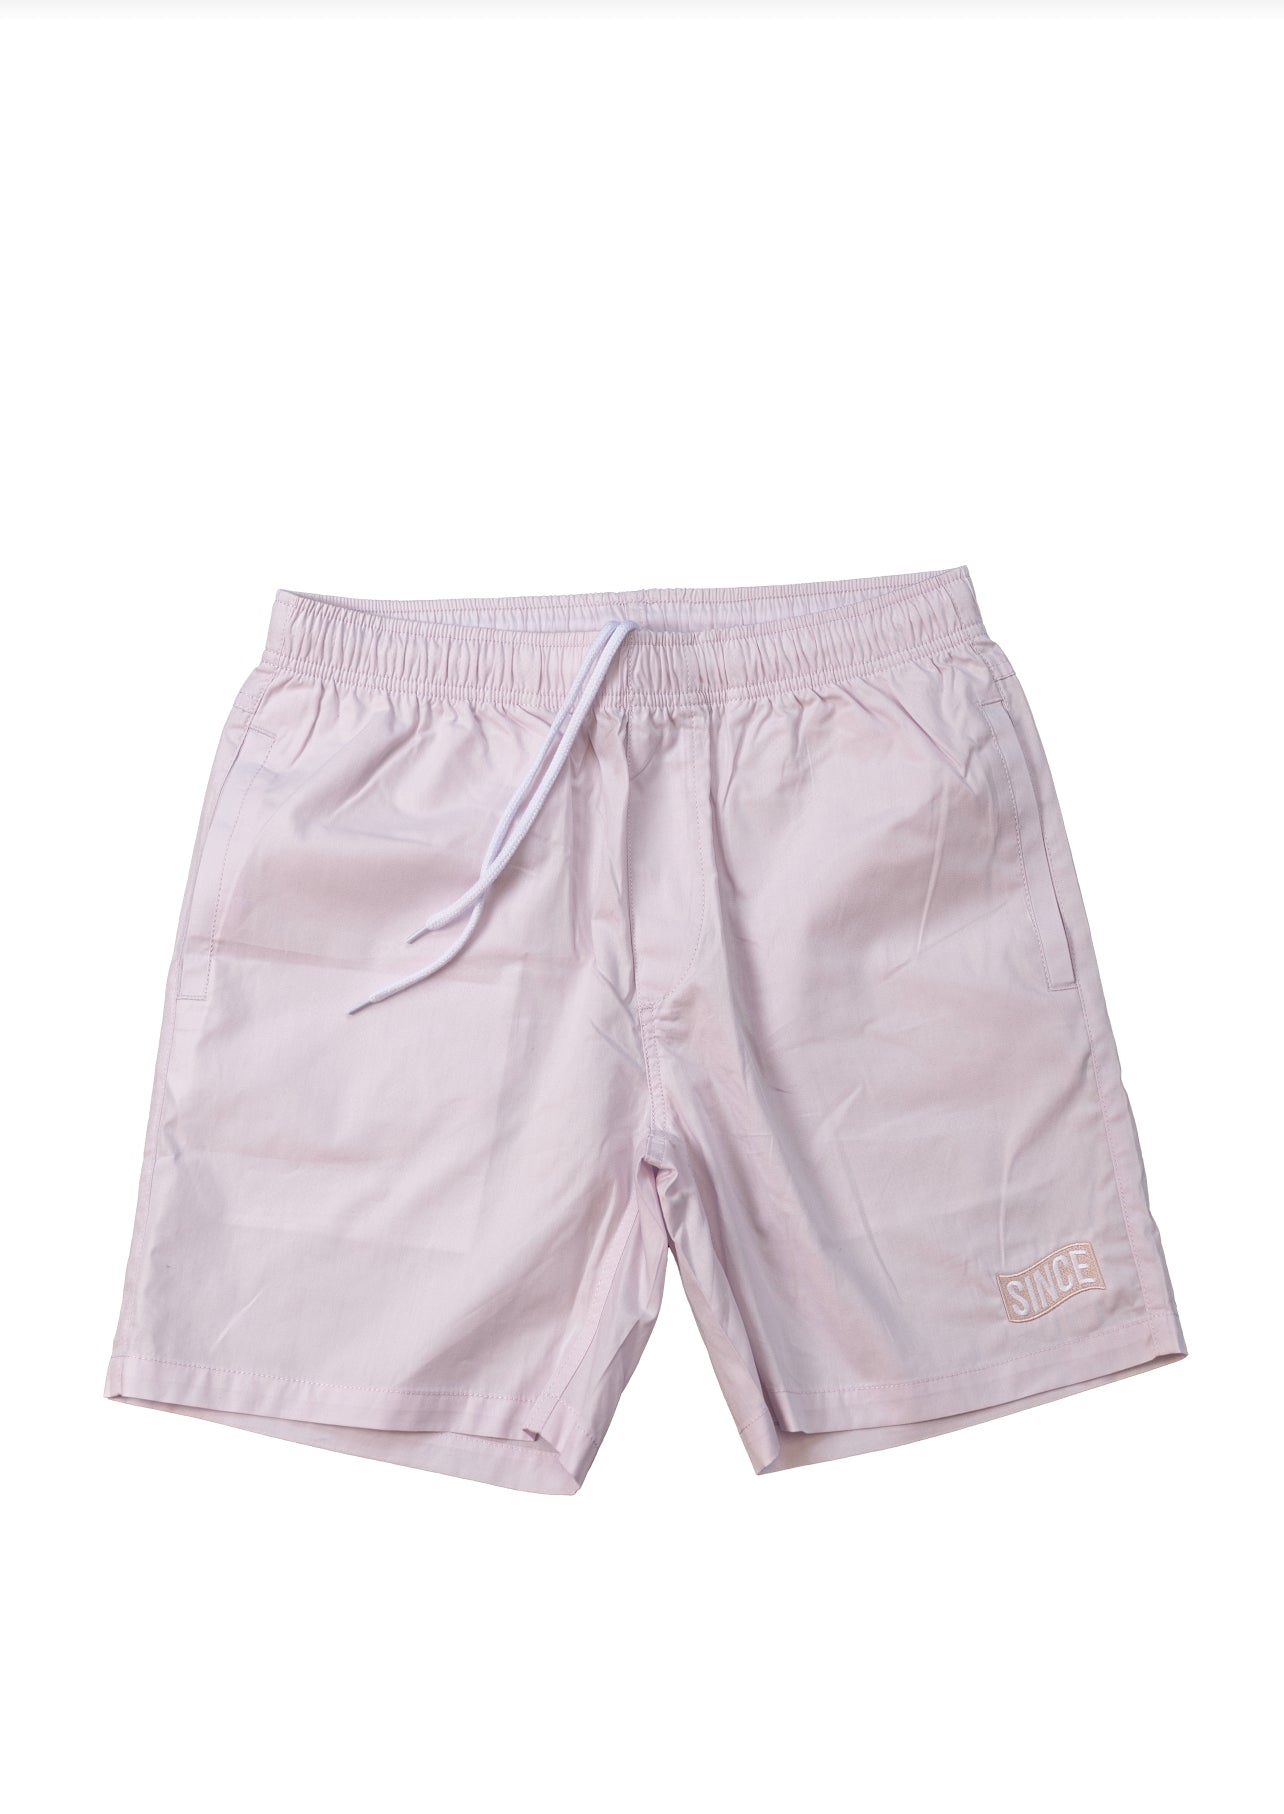 Lilac Since Sand Shorts (Above The Knee)